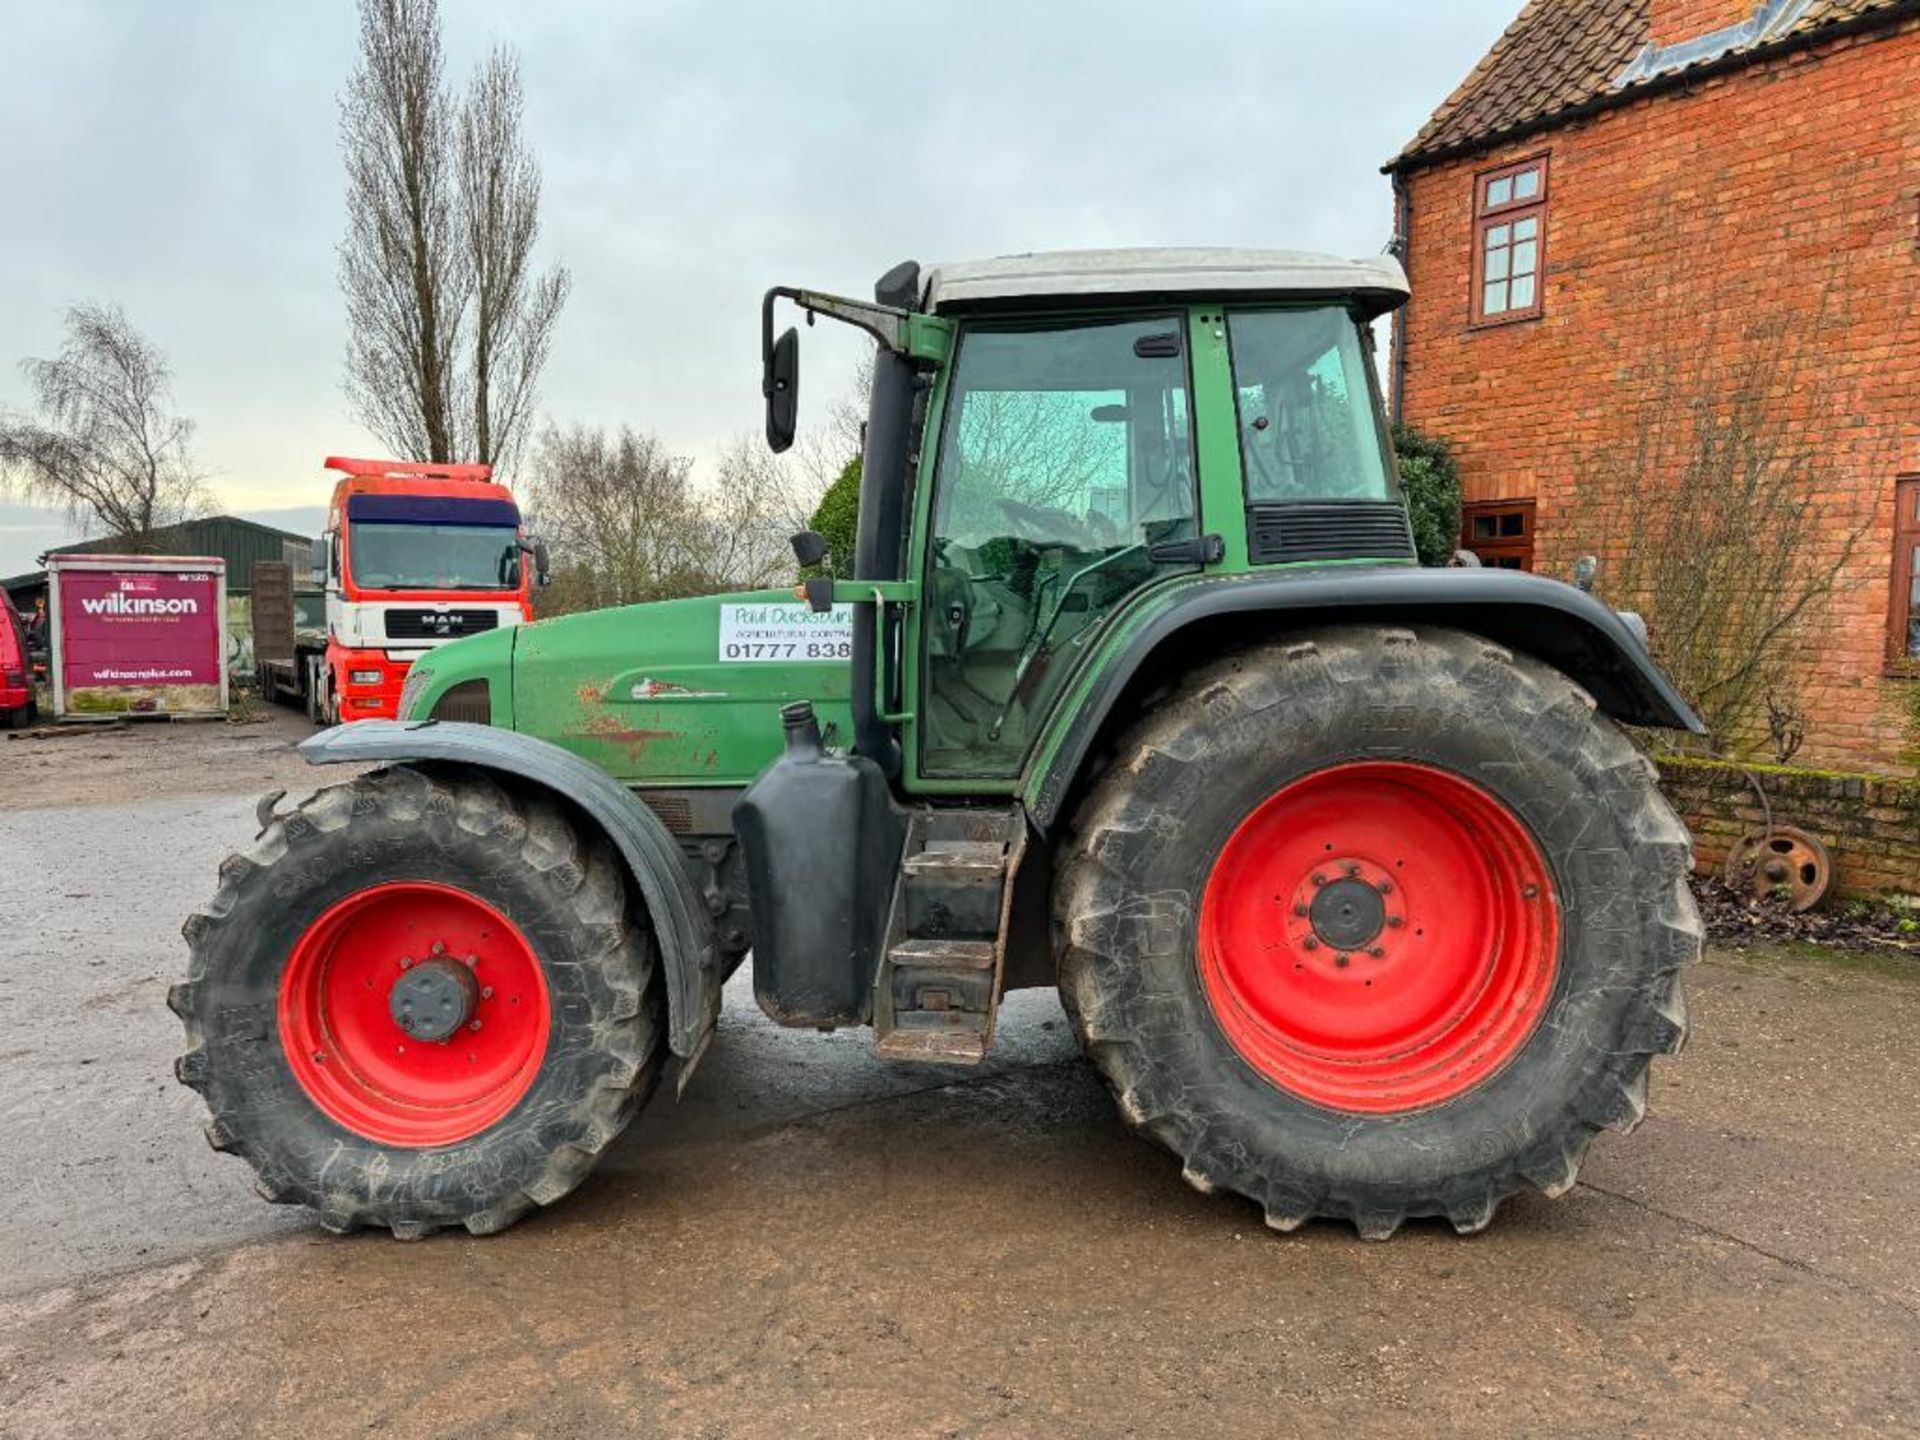 2001 Fendt 716 Vario 50kph 4wd tractor with 4 electric spools, air brakes and front linkage on BKT 5 - Image 20 of 22